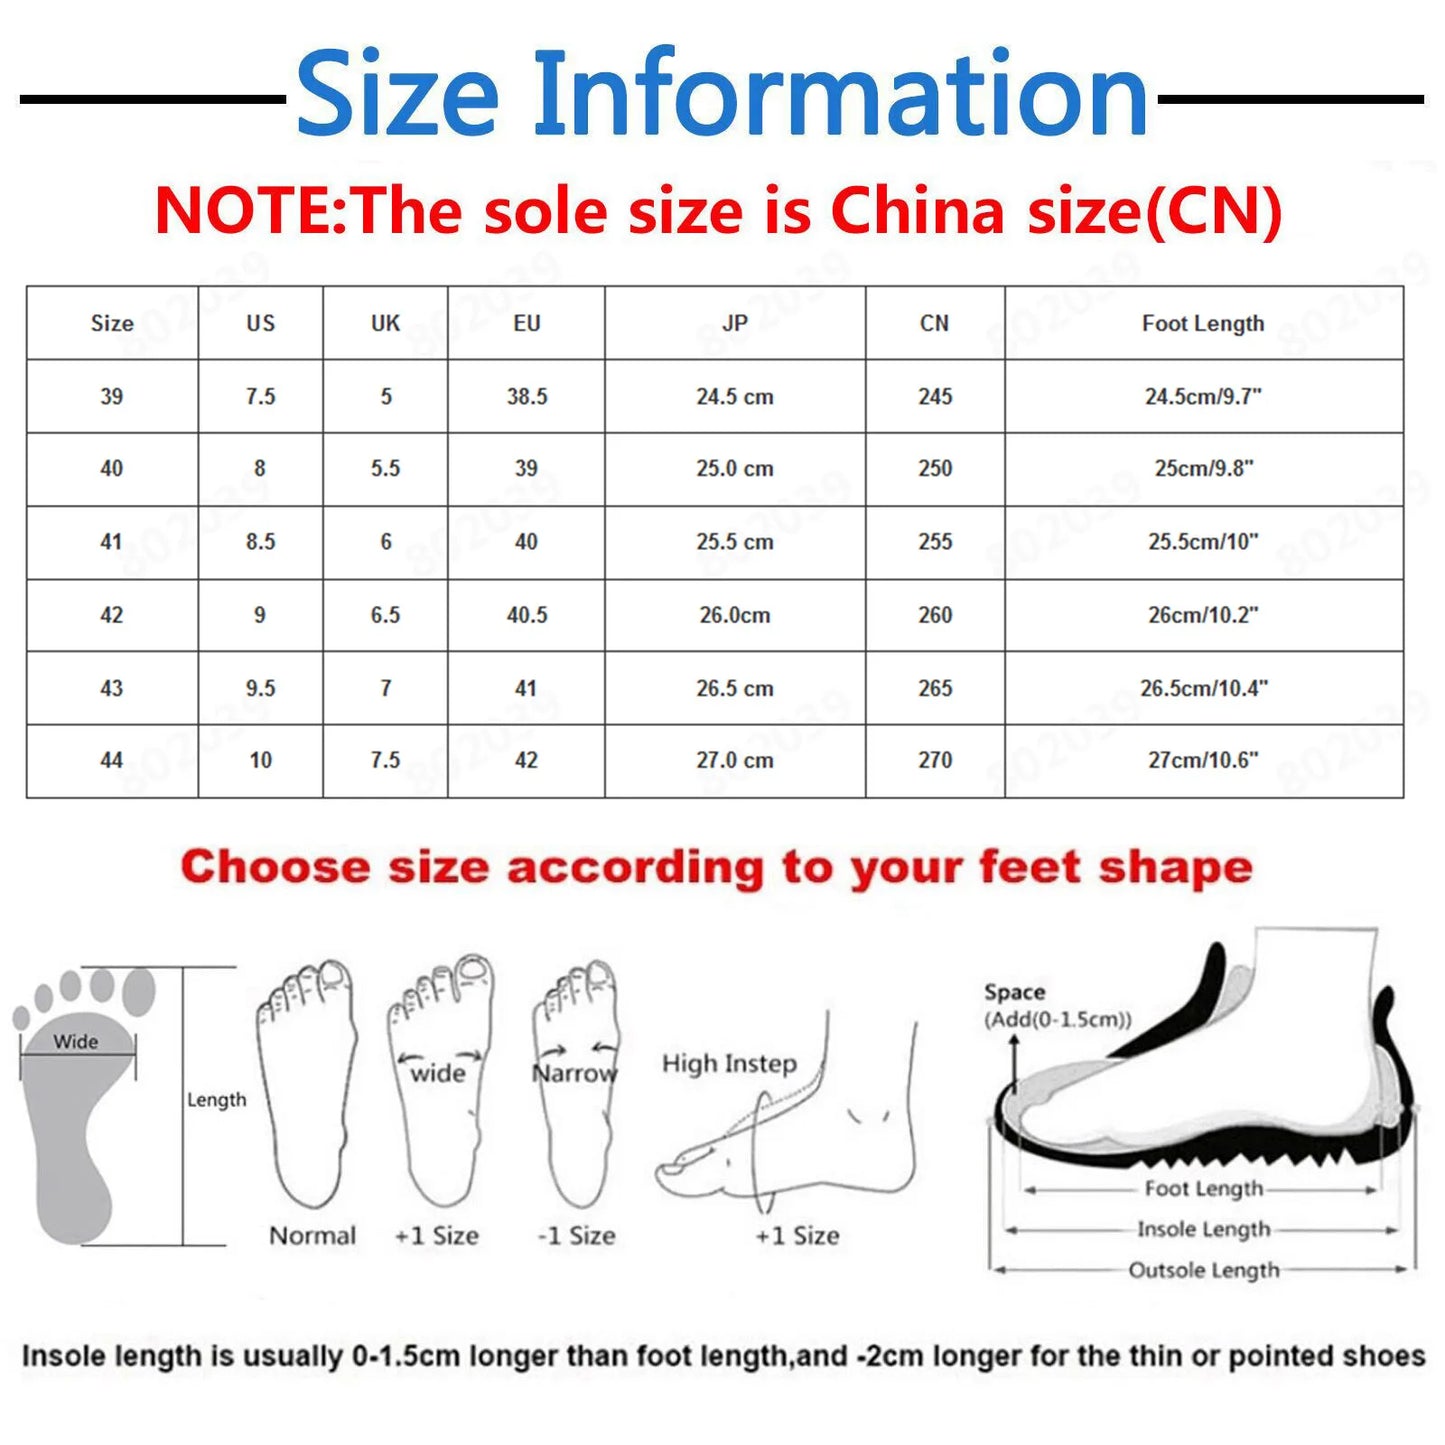 Men Non Slip Sneaker Lace Up Sports Shoes Fashionable Color Footwear/Mesh Fabric Breathable Comfortable Running Shoes